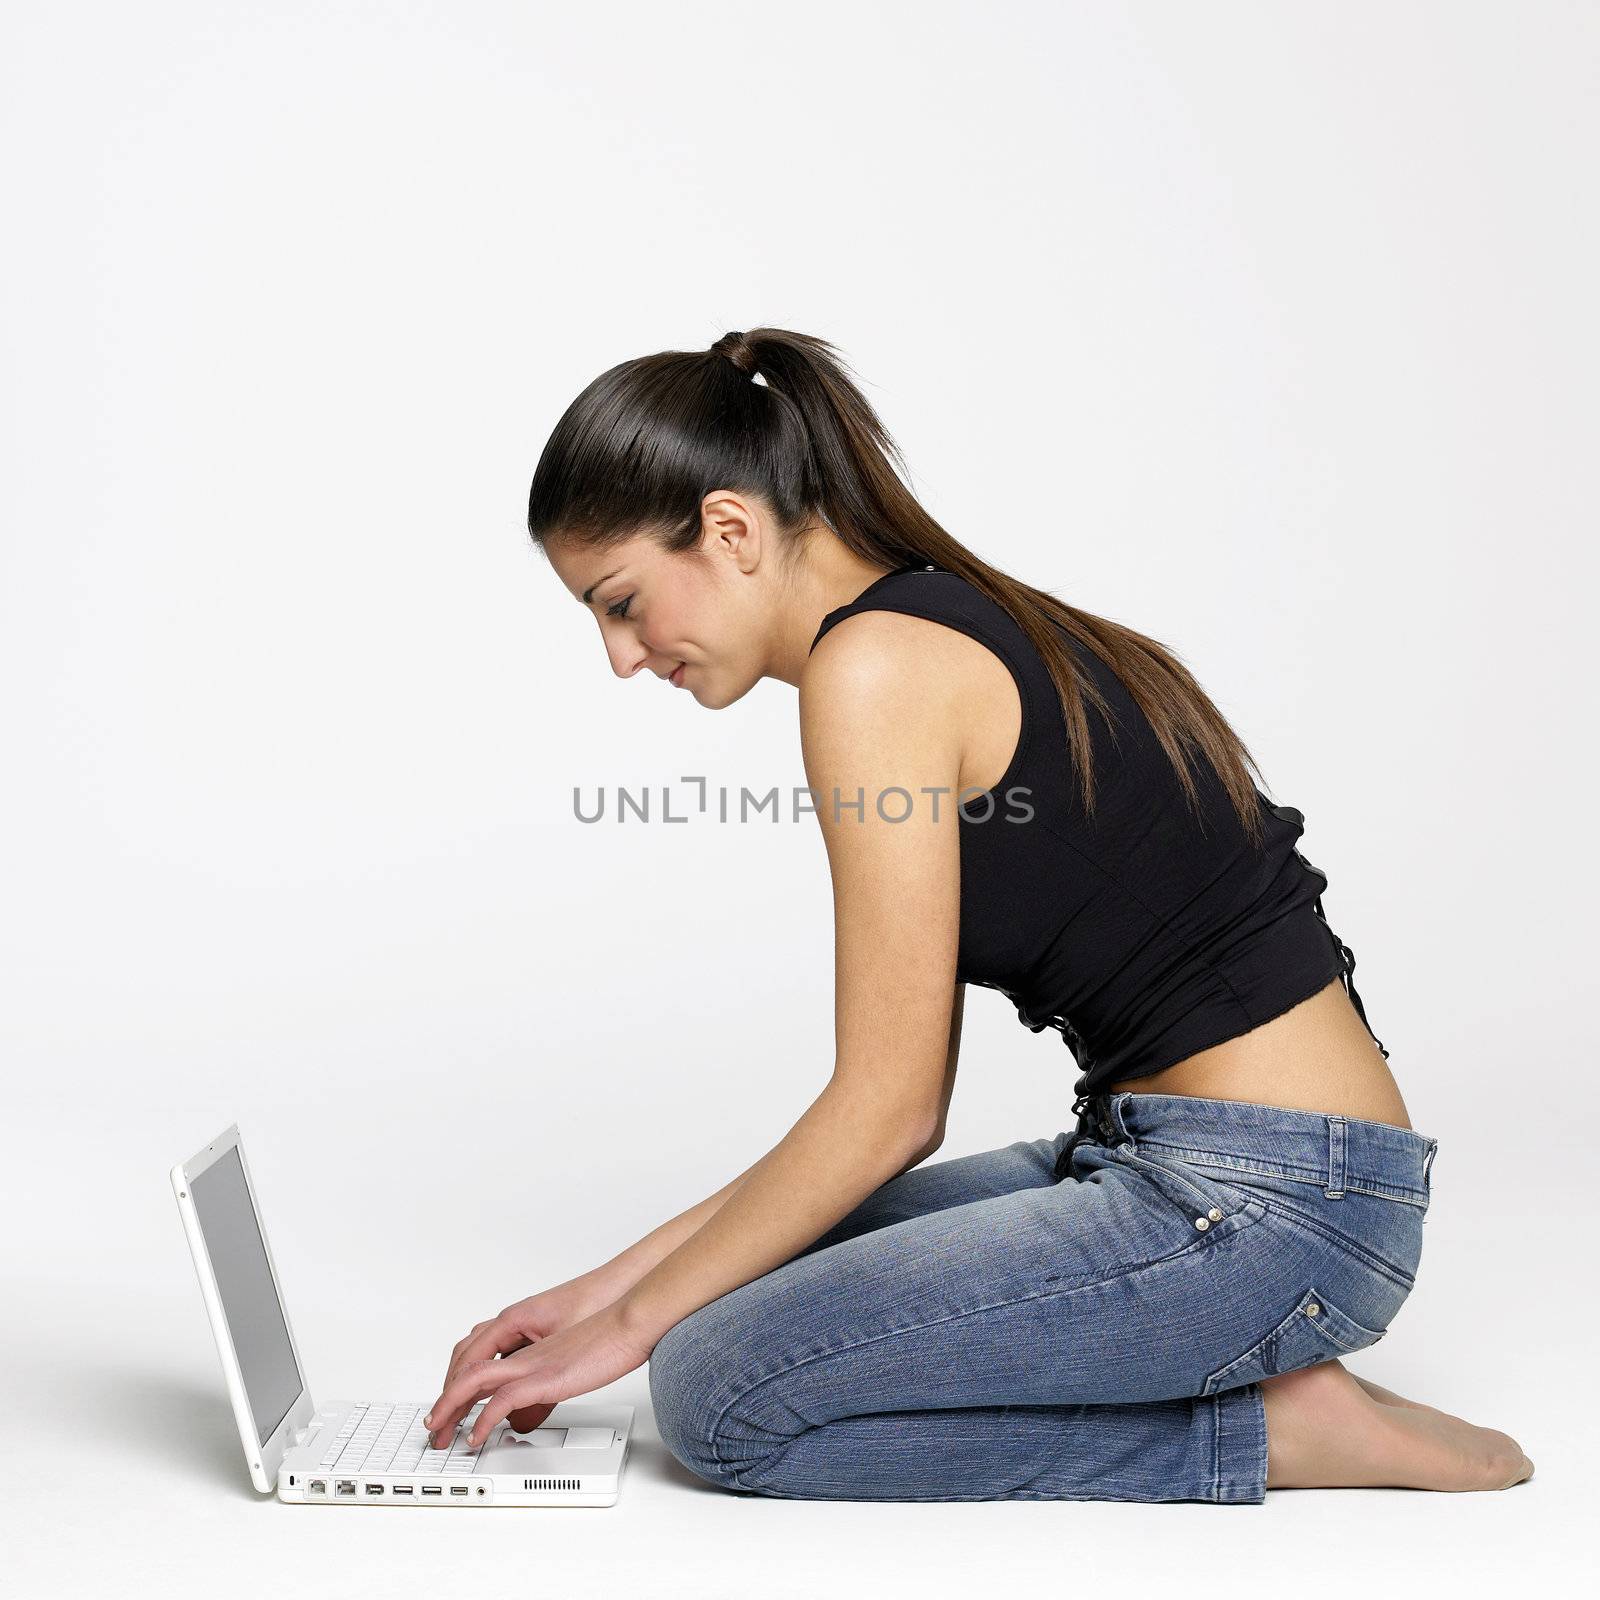 Pretty young girl sitting on floor with laptop